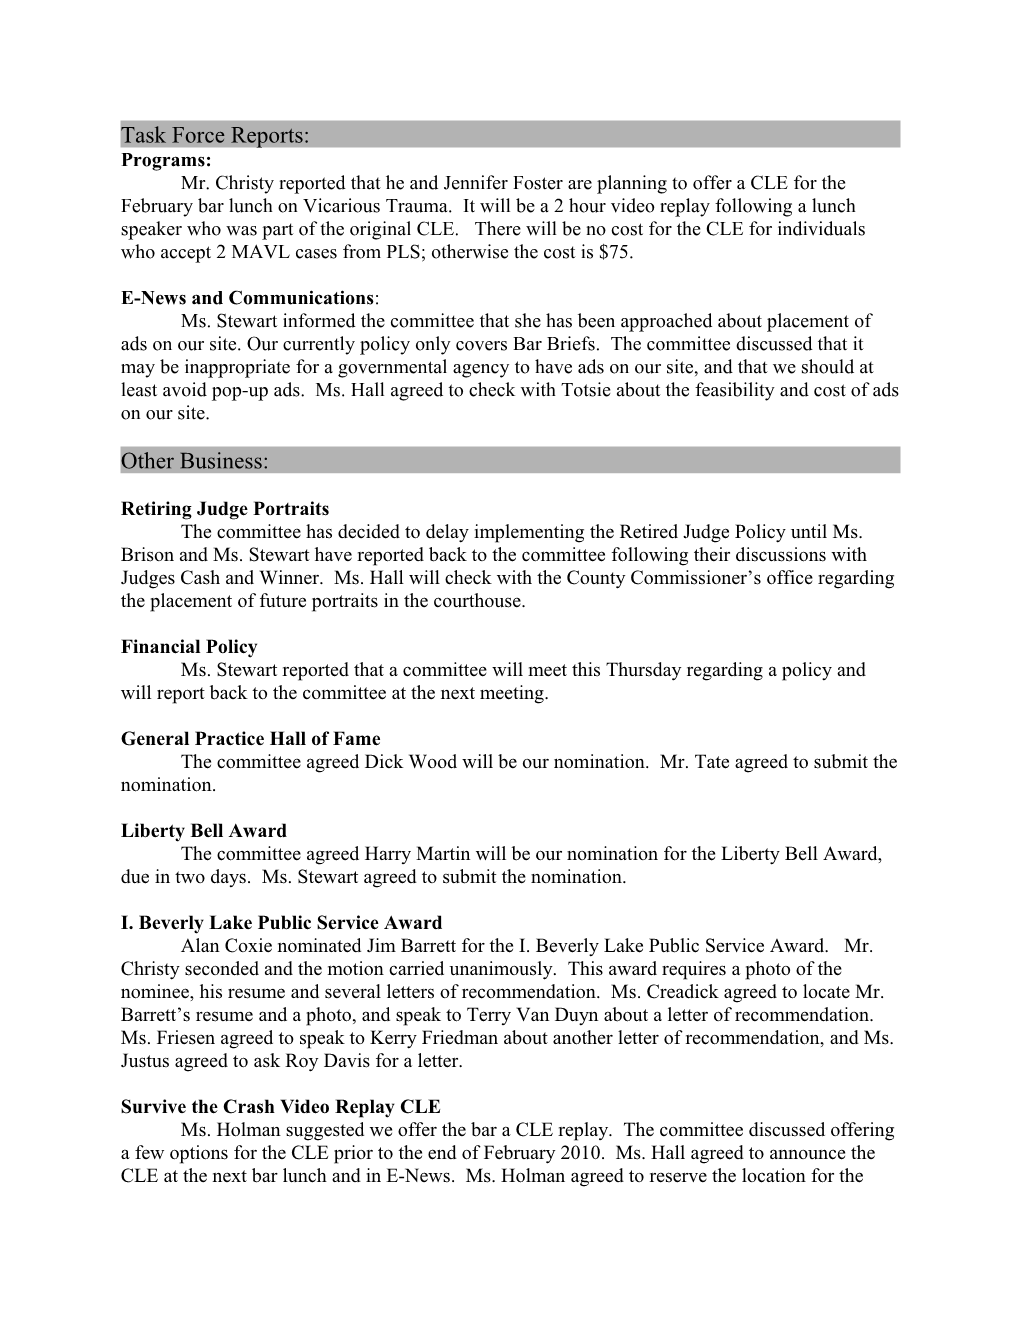 Minutes of the January 4, 2010 Executive Committee Meeting